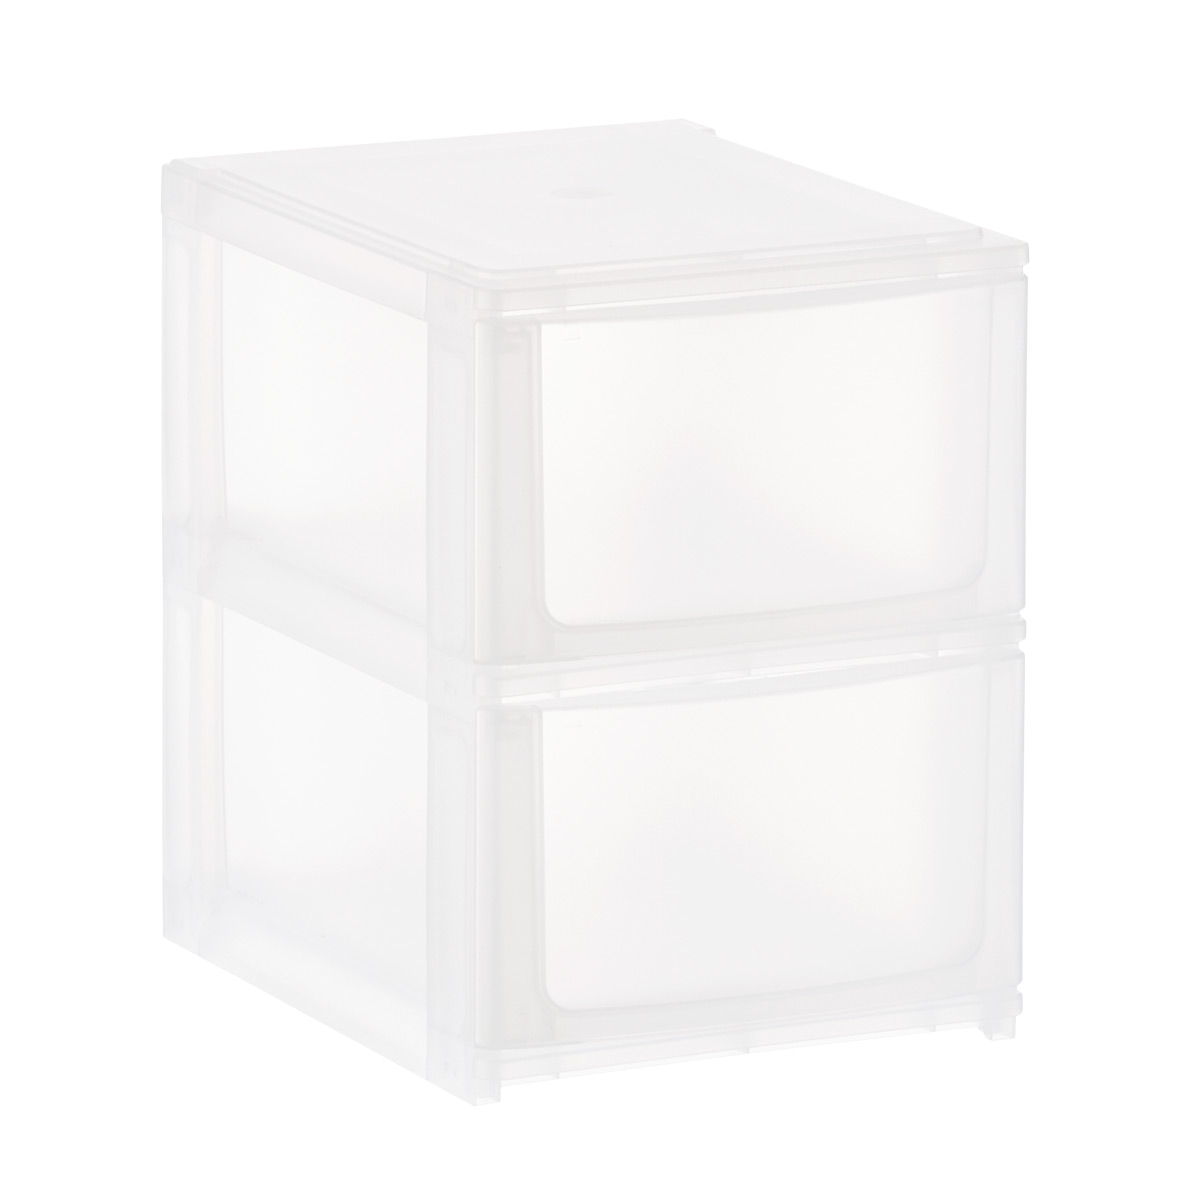 https://www.containerstore.com/catalogimages/378816/10079321-shimo-stacking-2-drawer-org.jpg